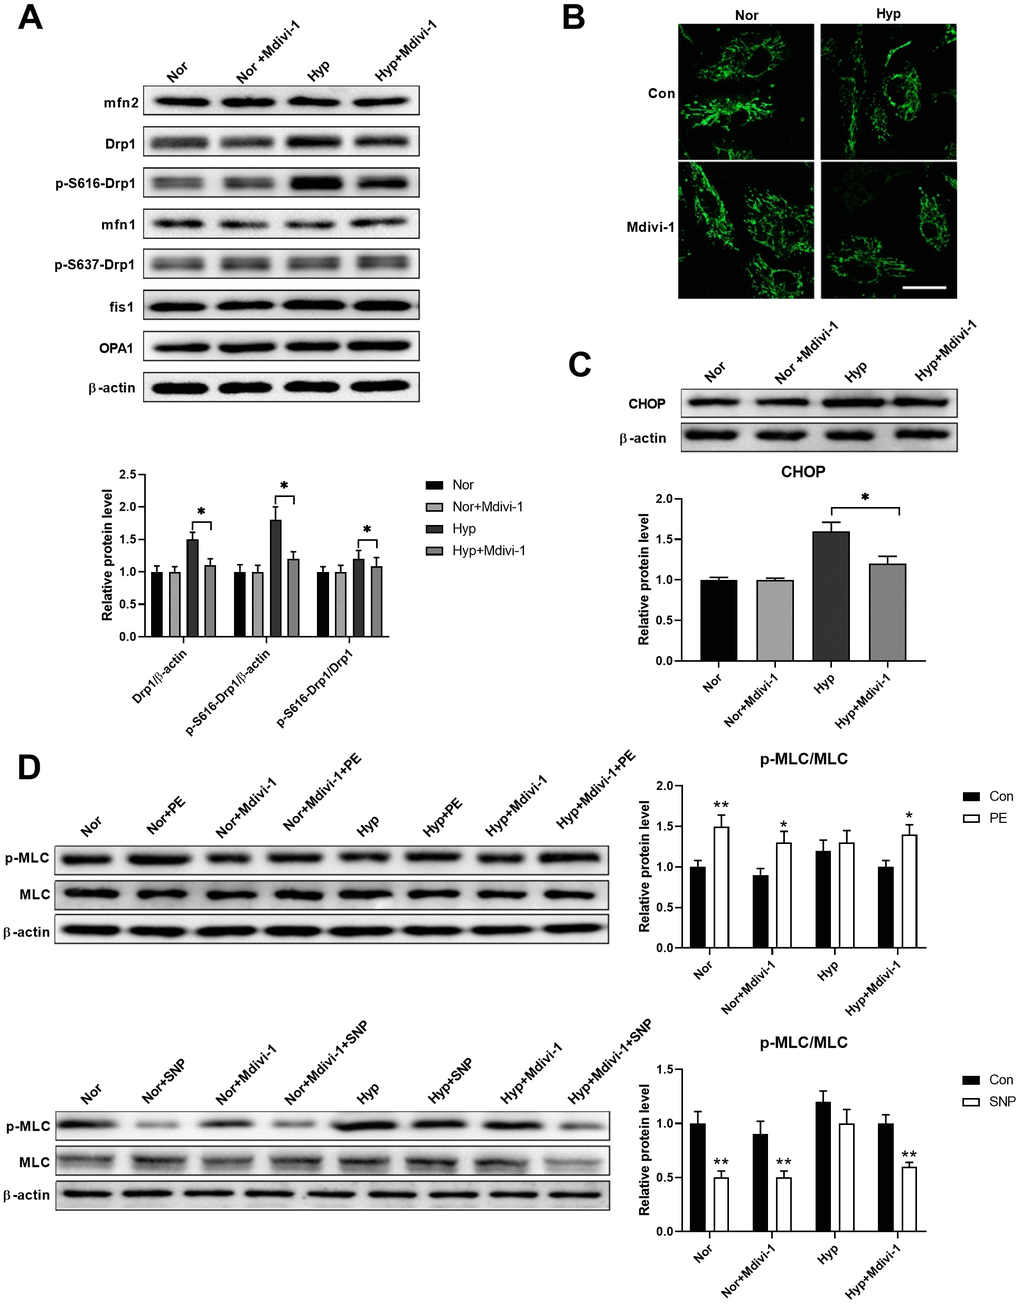 Mitochondrial fragmentation enhanced ER stress in cultured PASMCs under hypoxia. (A) Mdivi-1 treatment decreased Drp1 and Drp1 phosphorylation at serine 616 in PASMCs under hypoxia. Twenty micrograms of protein was loaded for each lane. (B) Mdivi-1 treatment inhibited mitochondrial fragmentation in PASMCs under hypoxia. Scale bar, 20 μm. (C) Mdivi-1 treatment inhibited ER stress as evidenced by the decreased CHOP expression in PASMCs under hypoxia. Twenty micrograms of protein was loaded for each lane. (D) Mdivi-1 treatment improved PASMC function as evidenced by increased PE/SNP-induced MLC phosphorylation/dephosphorylation in PASMCs under hypoxia. Twenty micrograms of protein was loaded for each lane. *, p p 